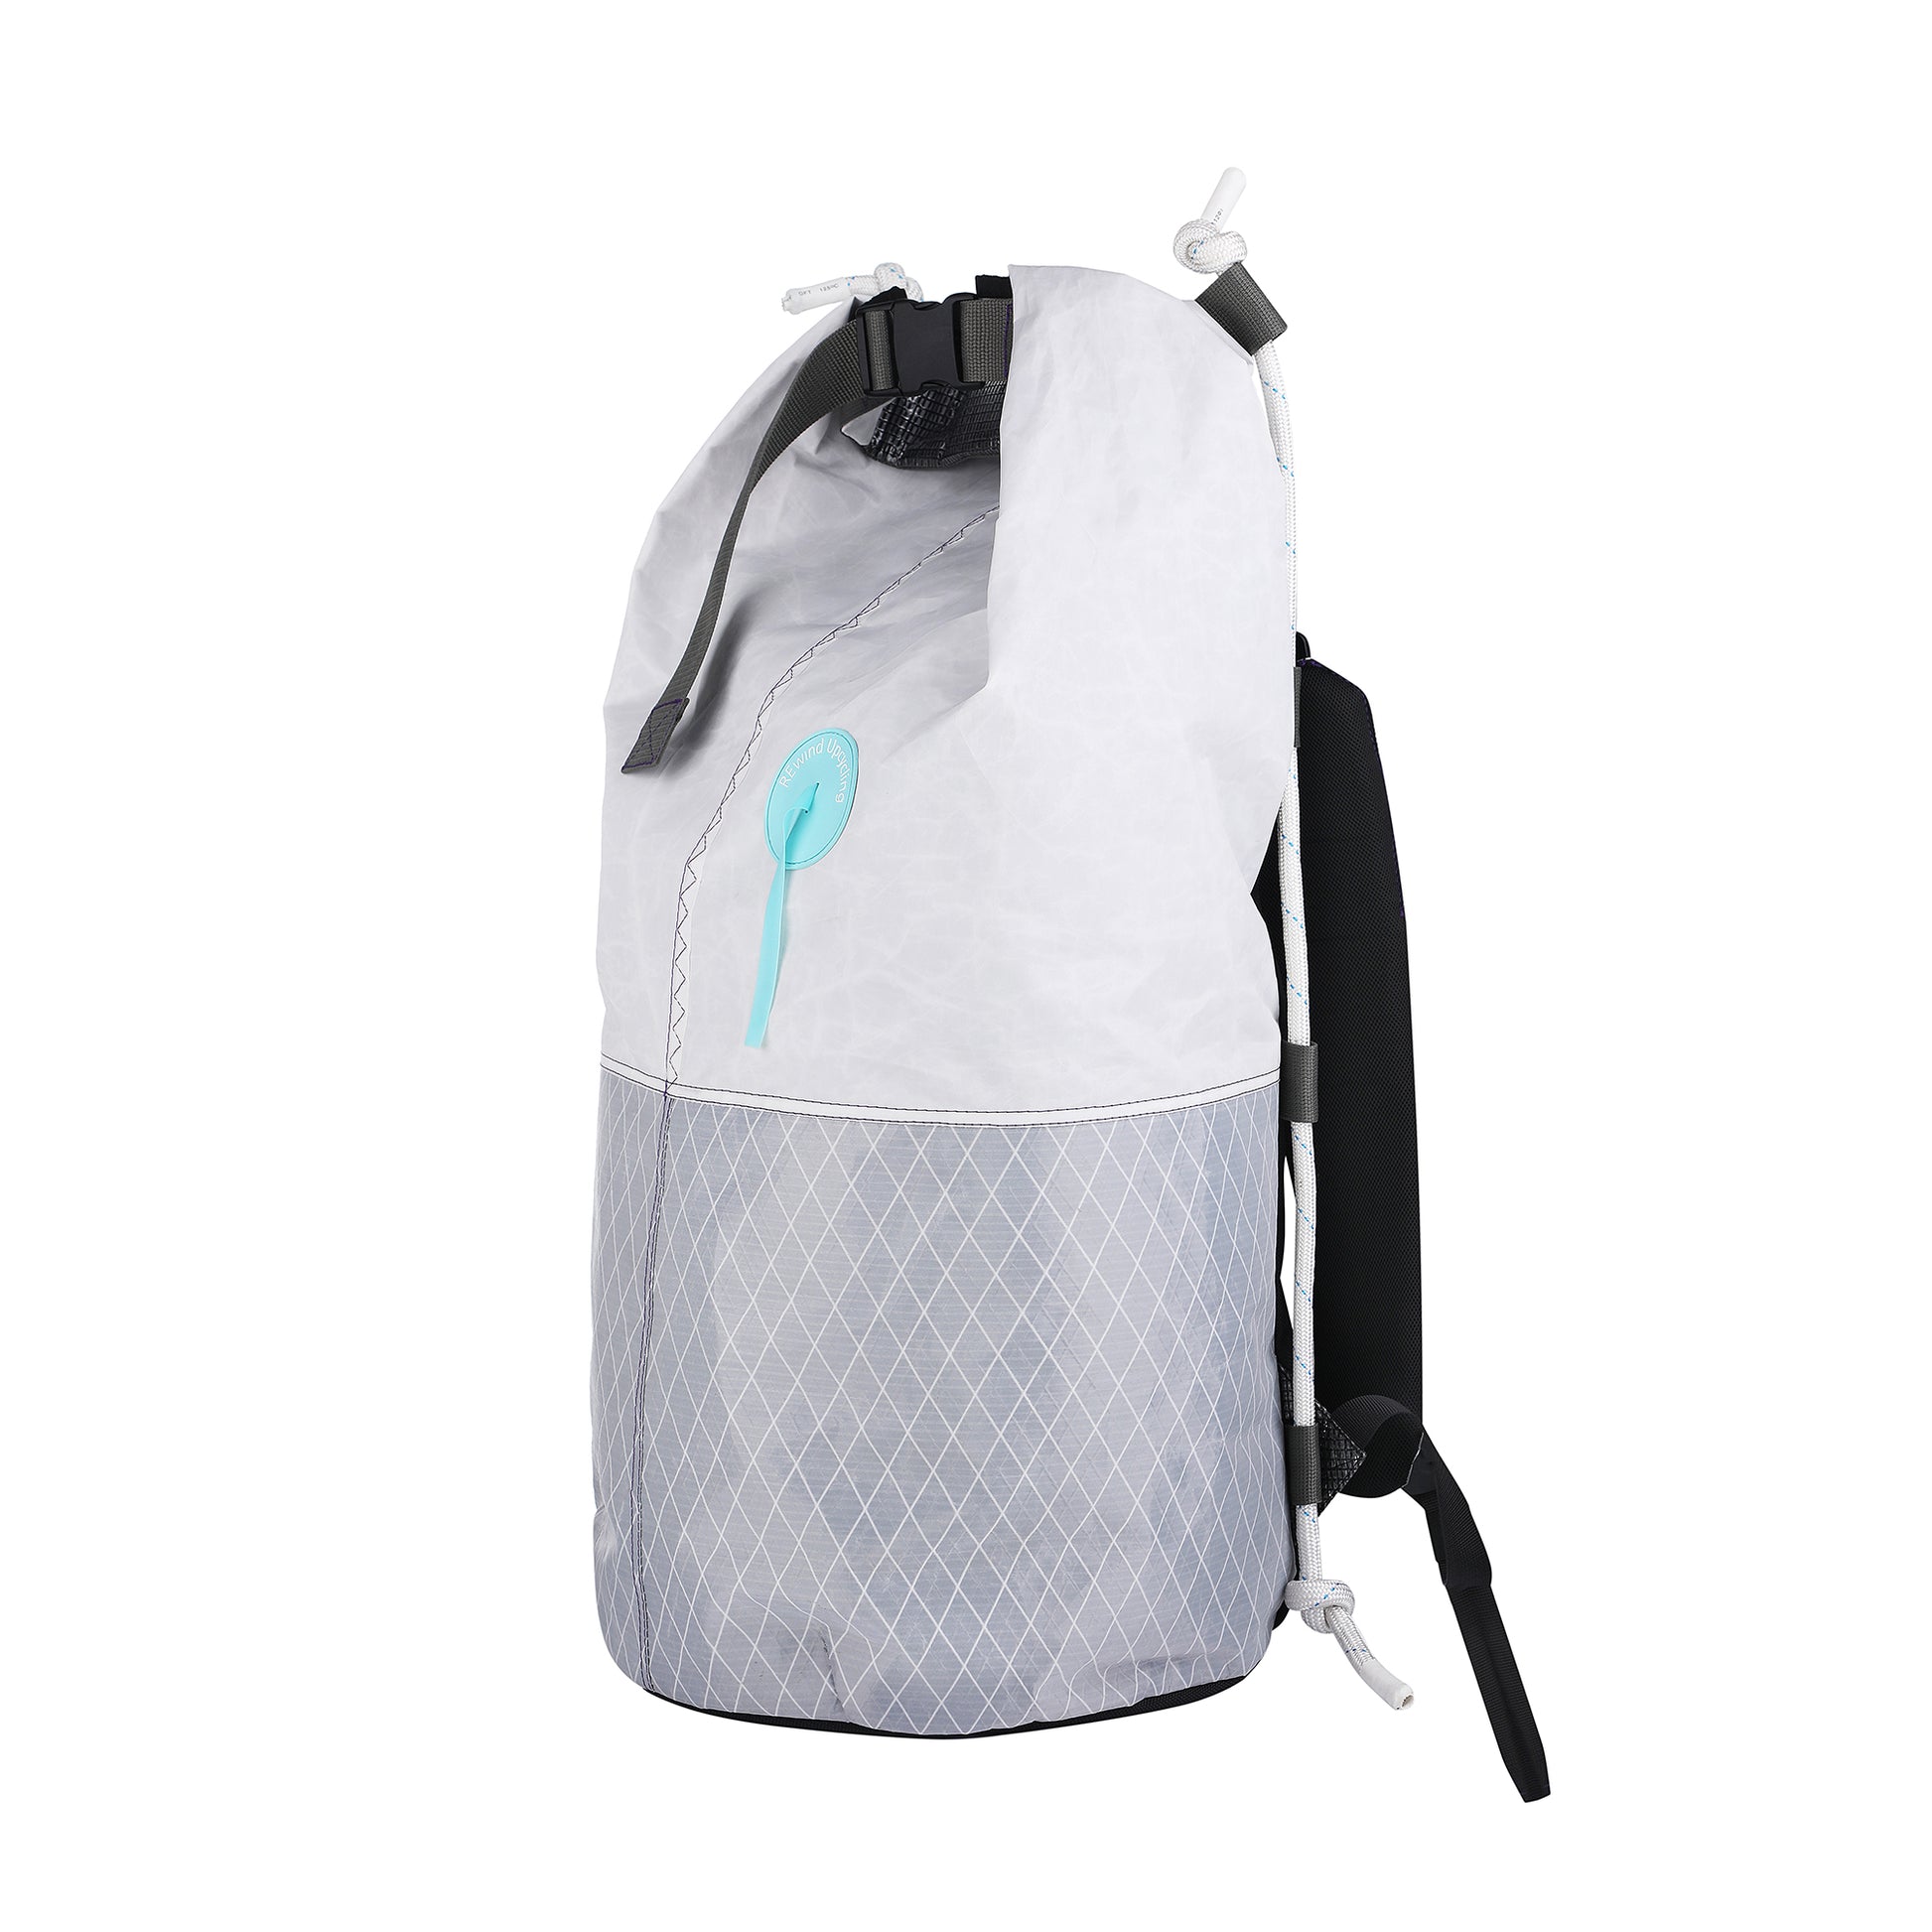 Waterproof Lightweight backpack in grey, silver and black colours